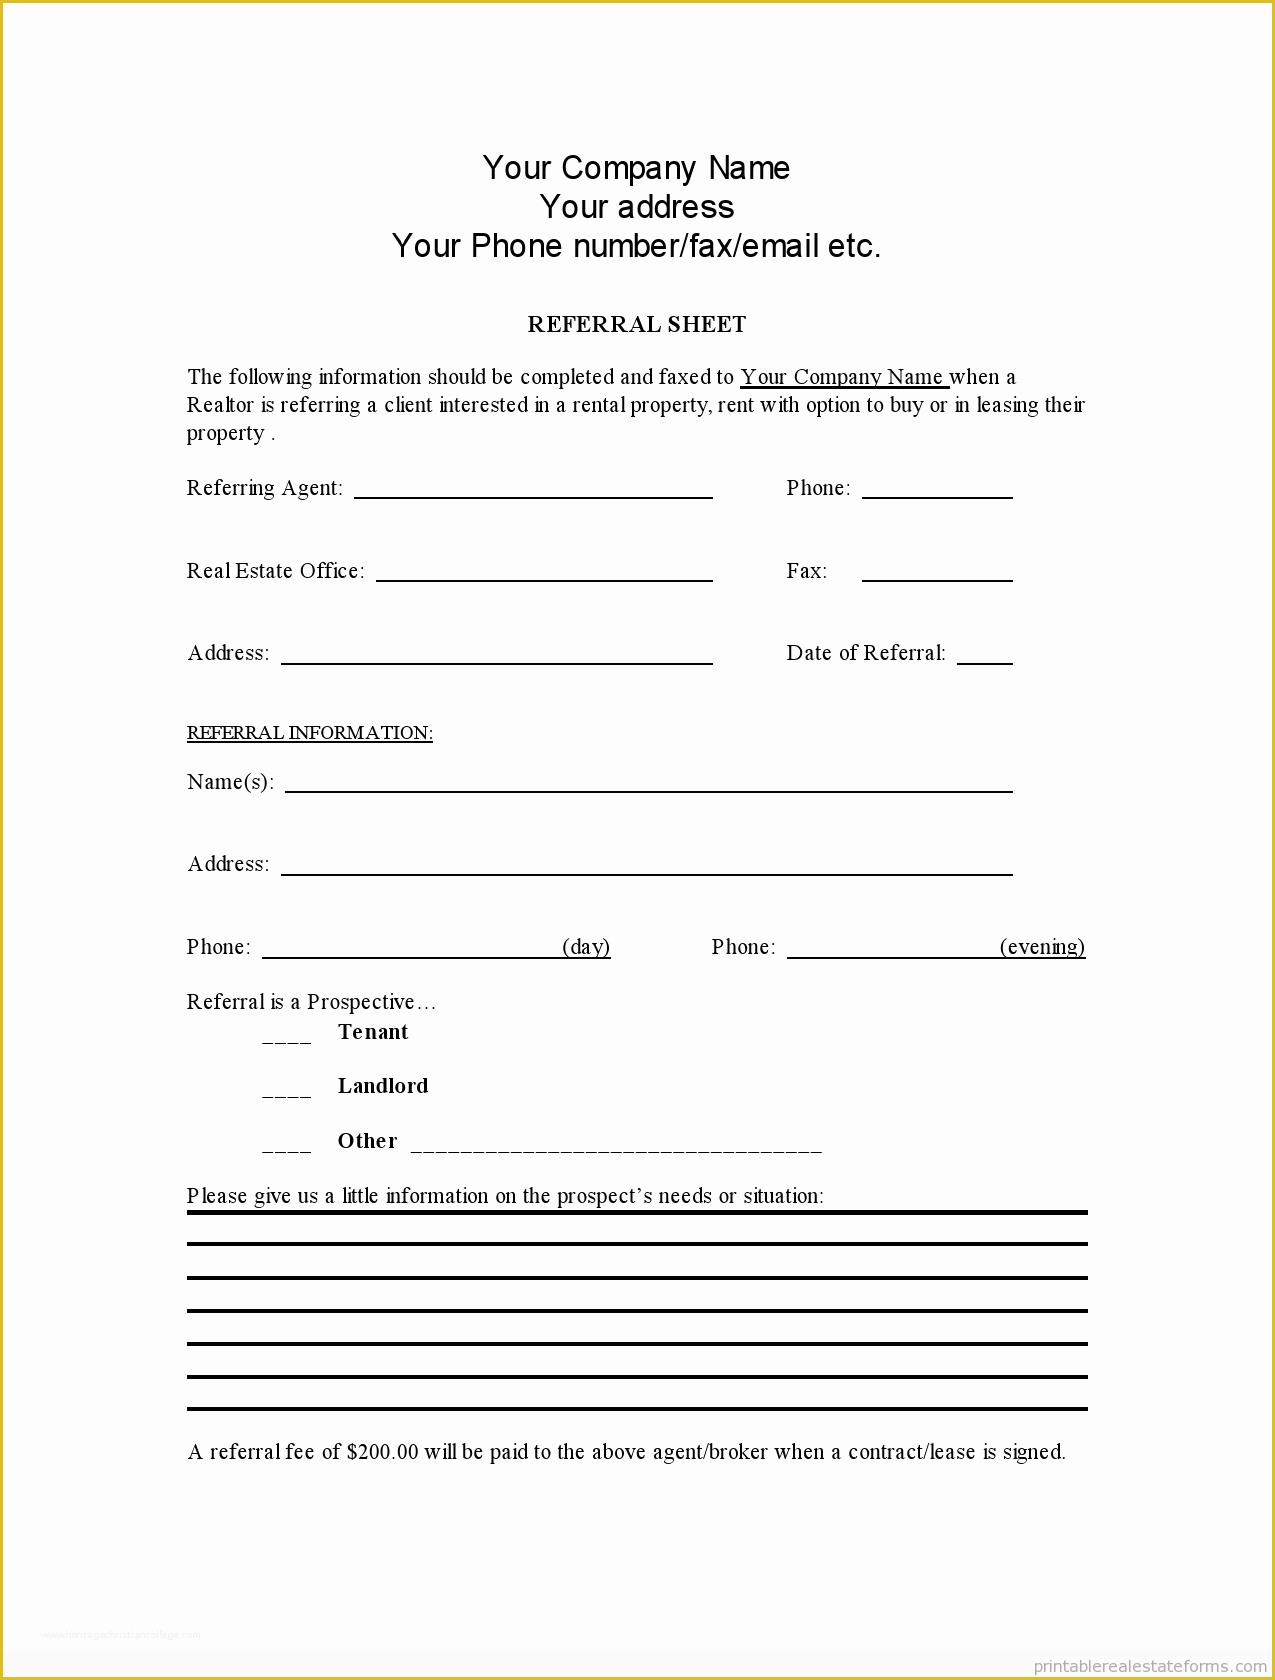 Free Referral Program Template Of Free Printable Real Estate Referral form Template Pdf